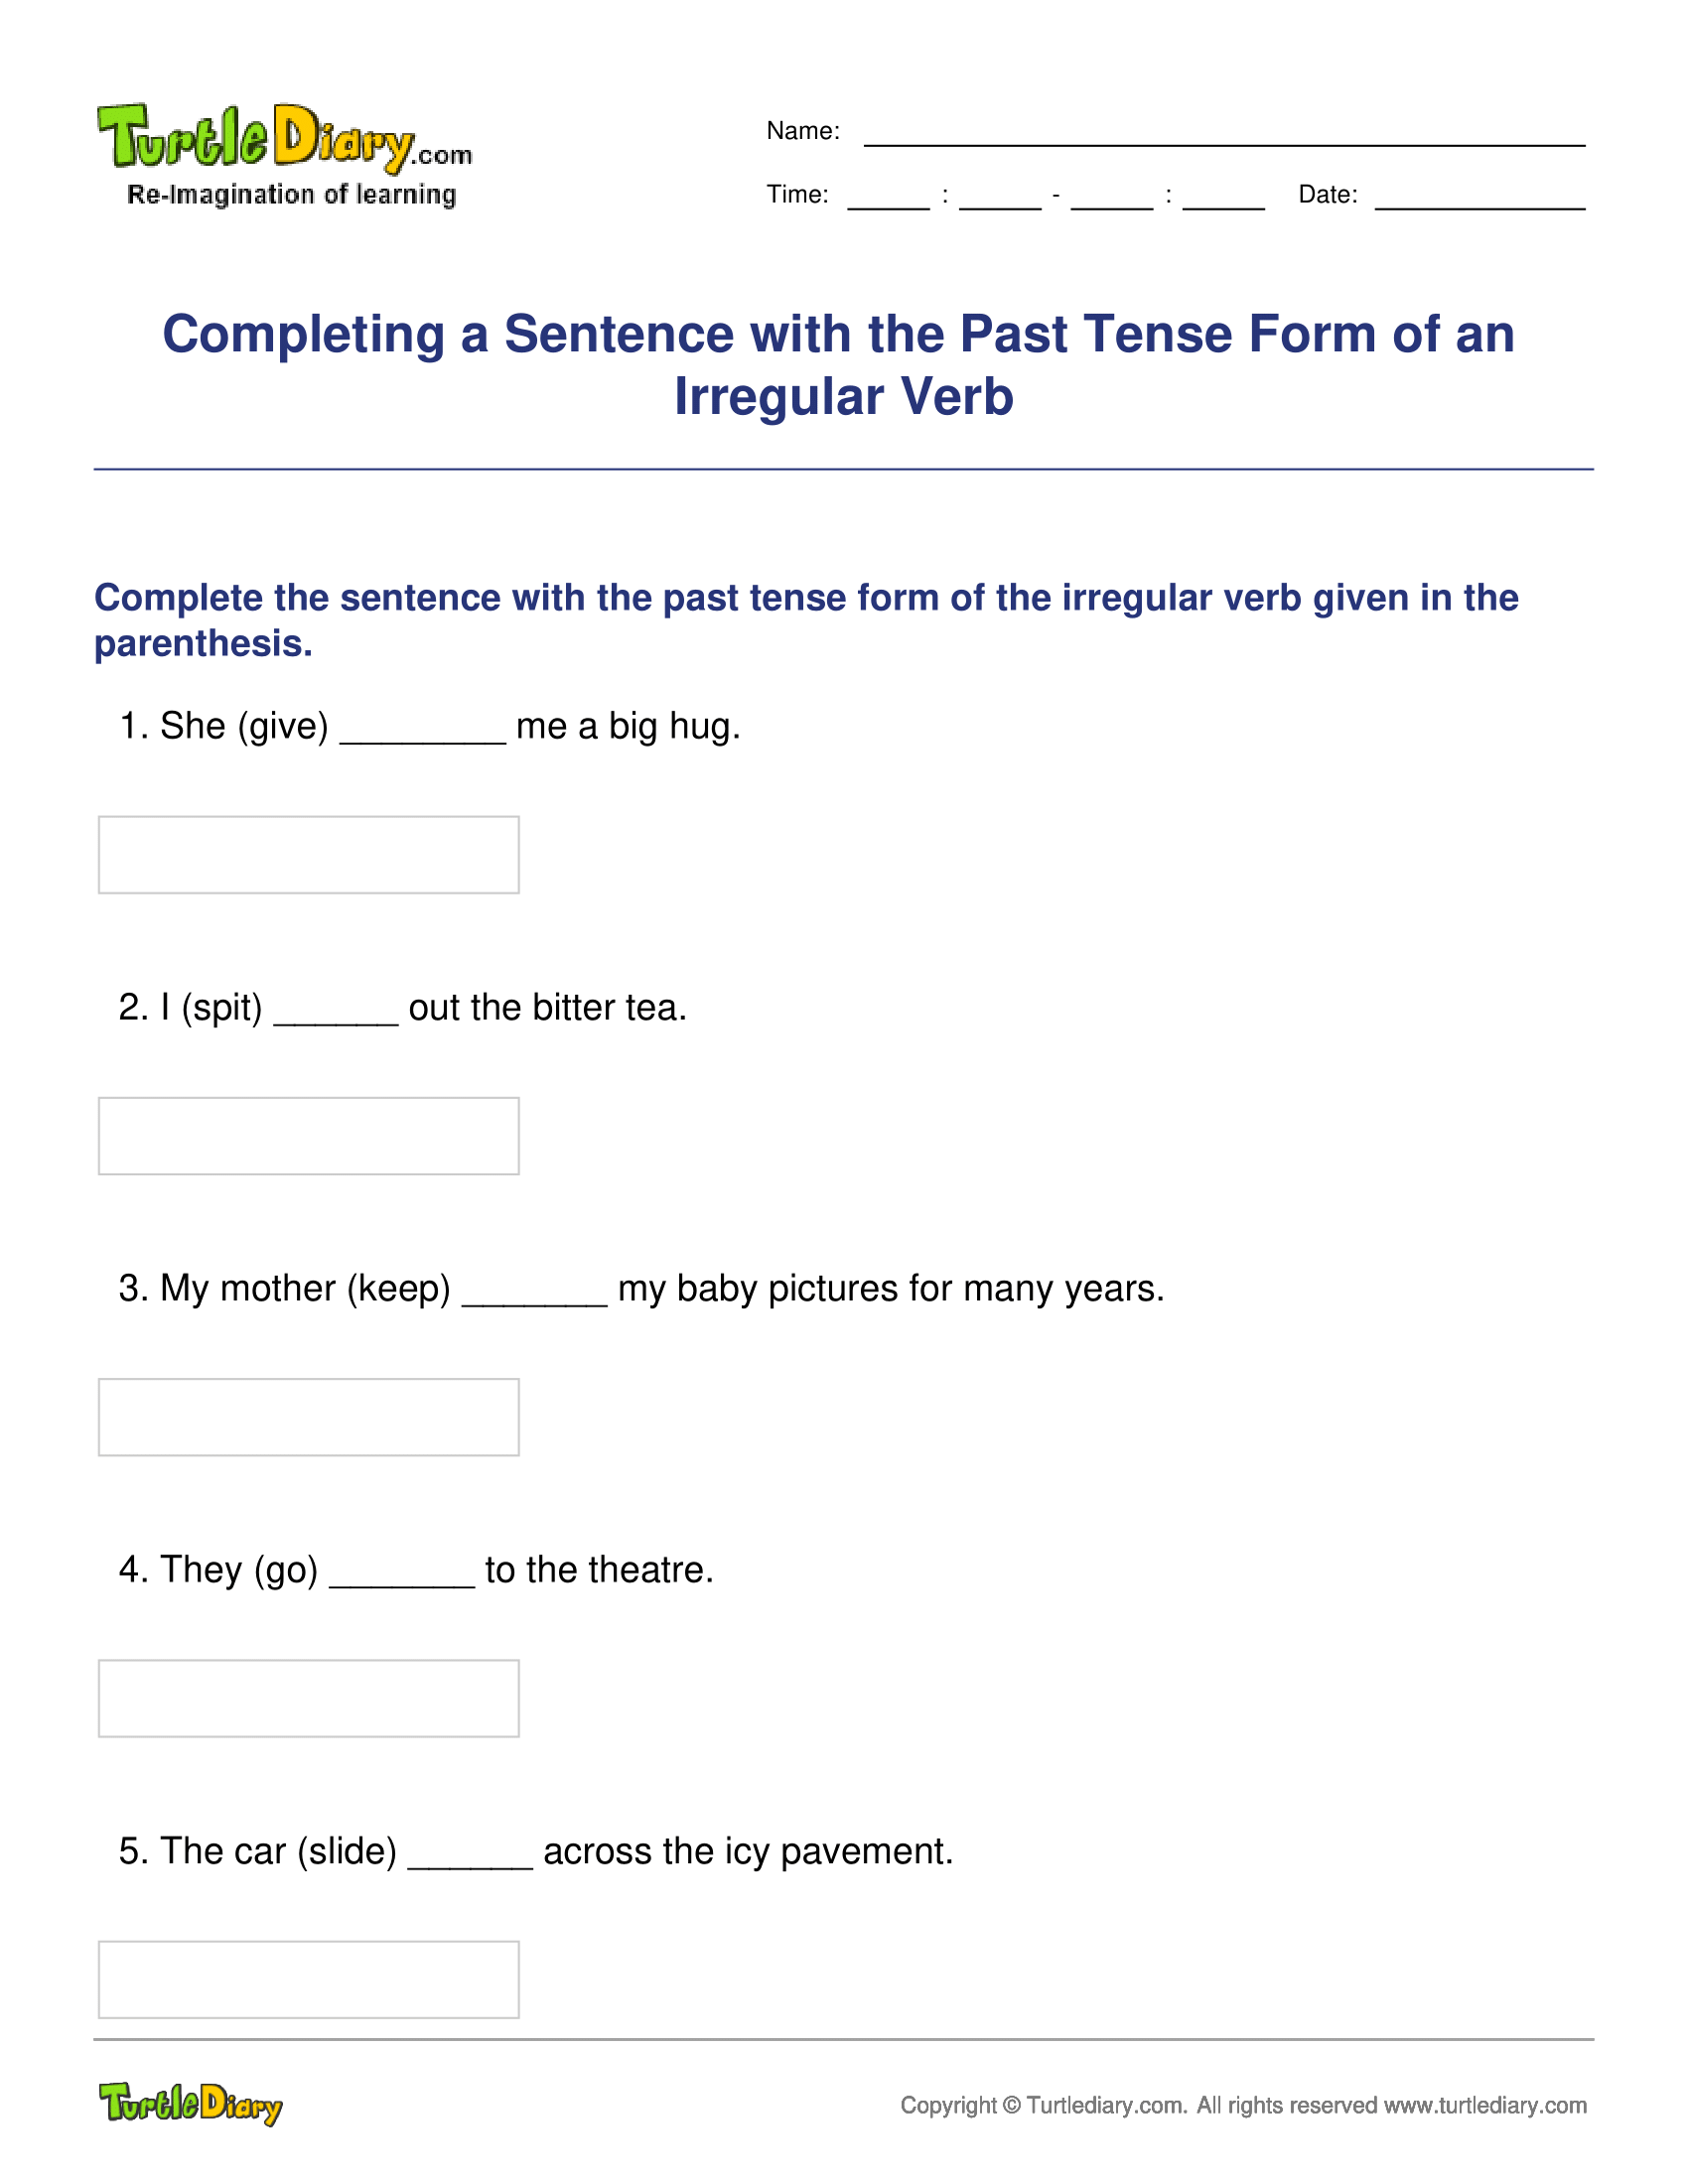 Completing a Sentence with the Past Tense Form of an Irregular Verb